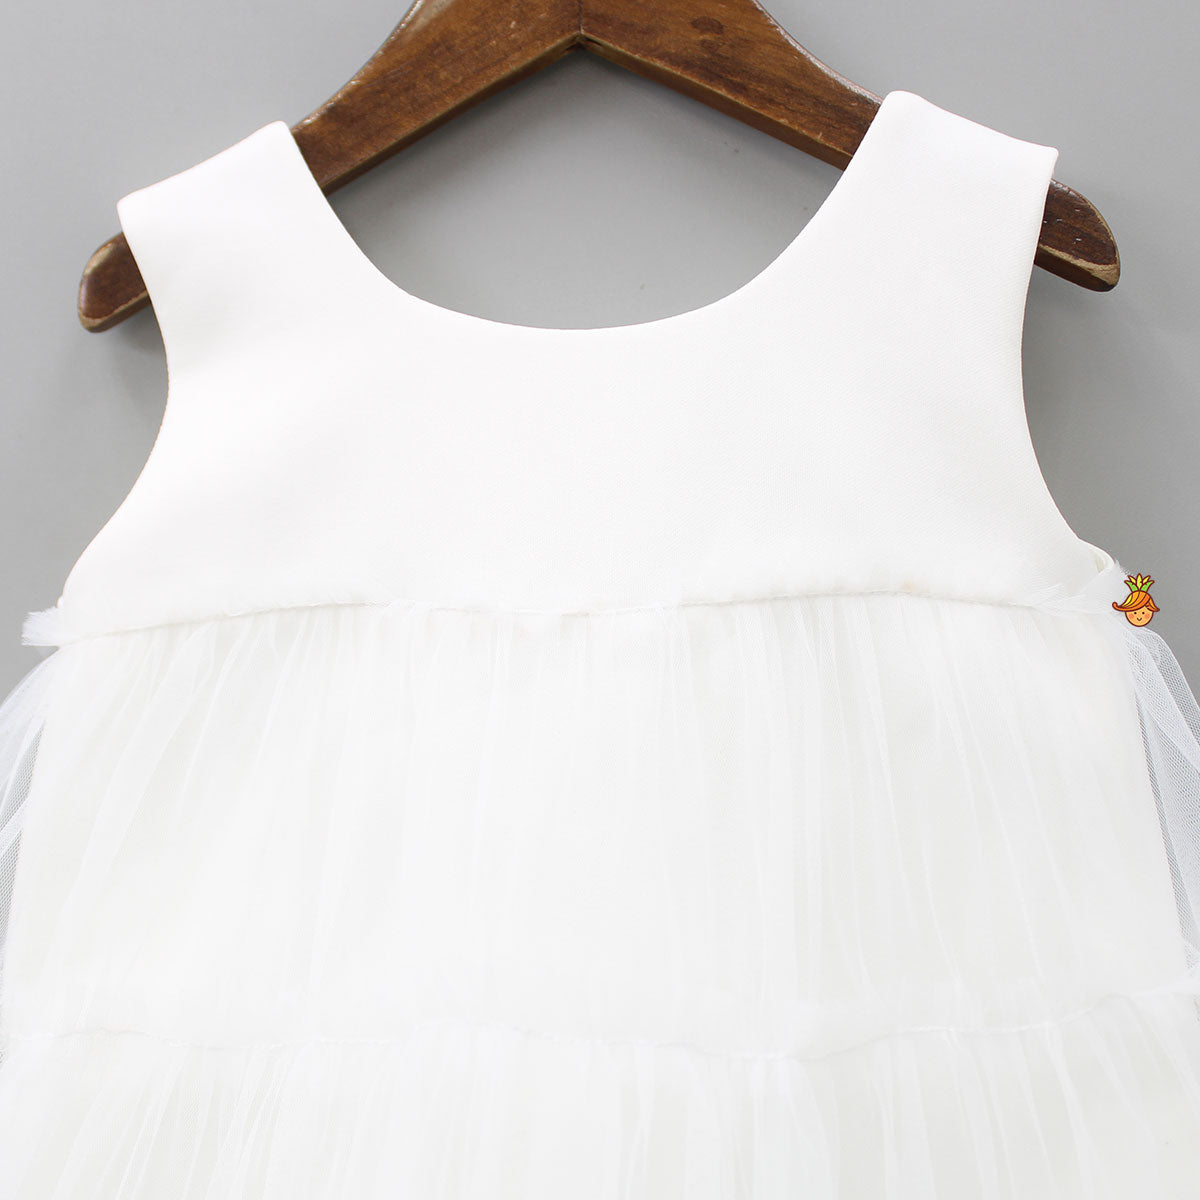 White Dress With Multicolour Ruffled Hem And Matching Bowie Hair Band